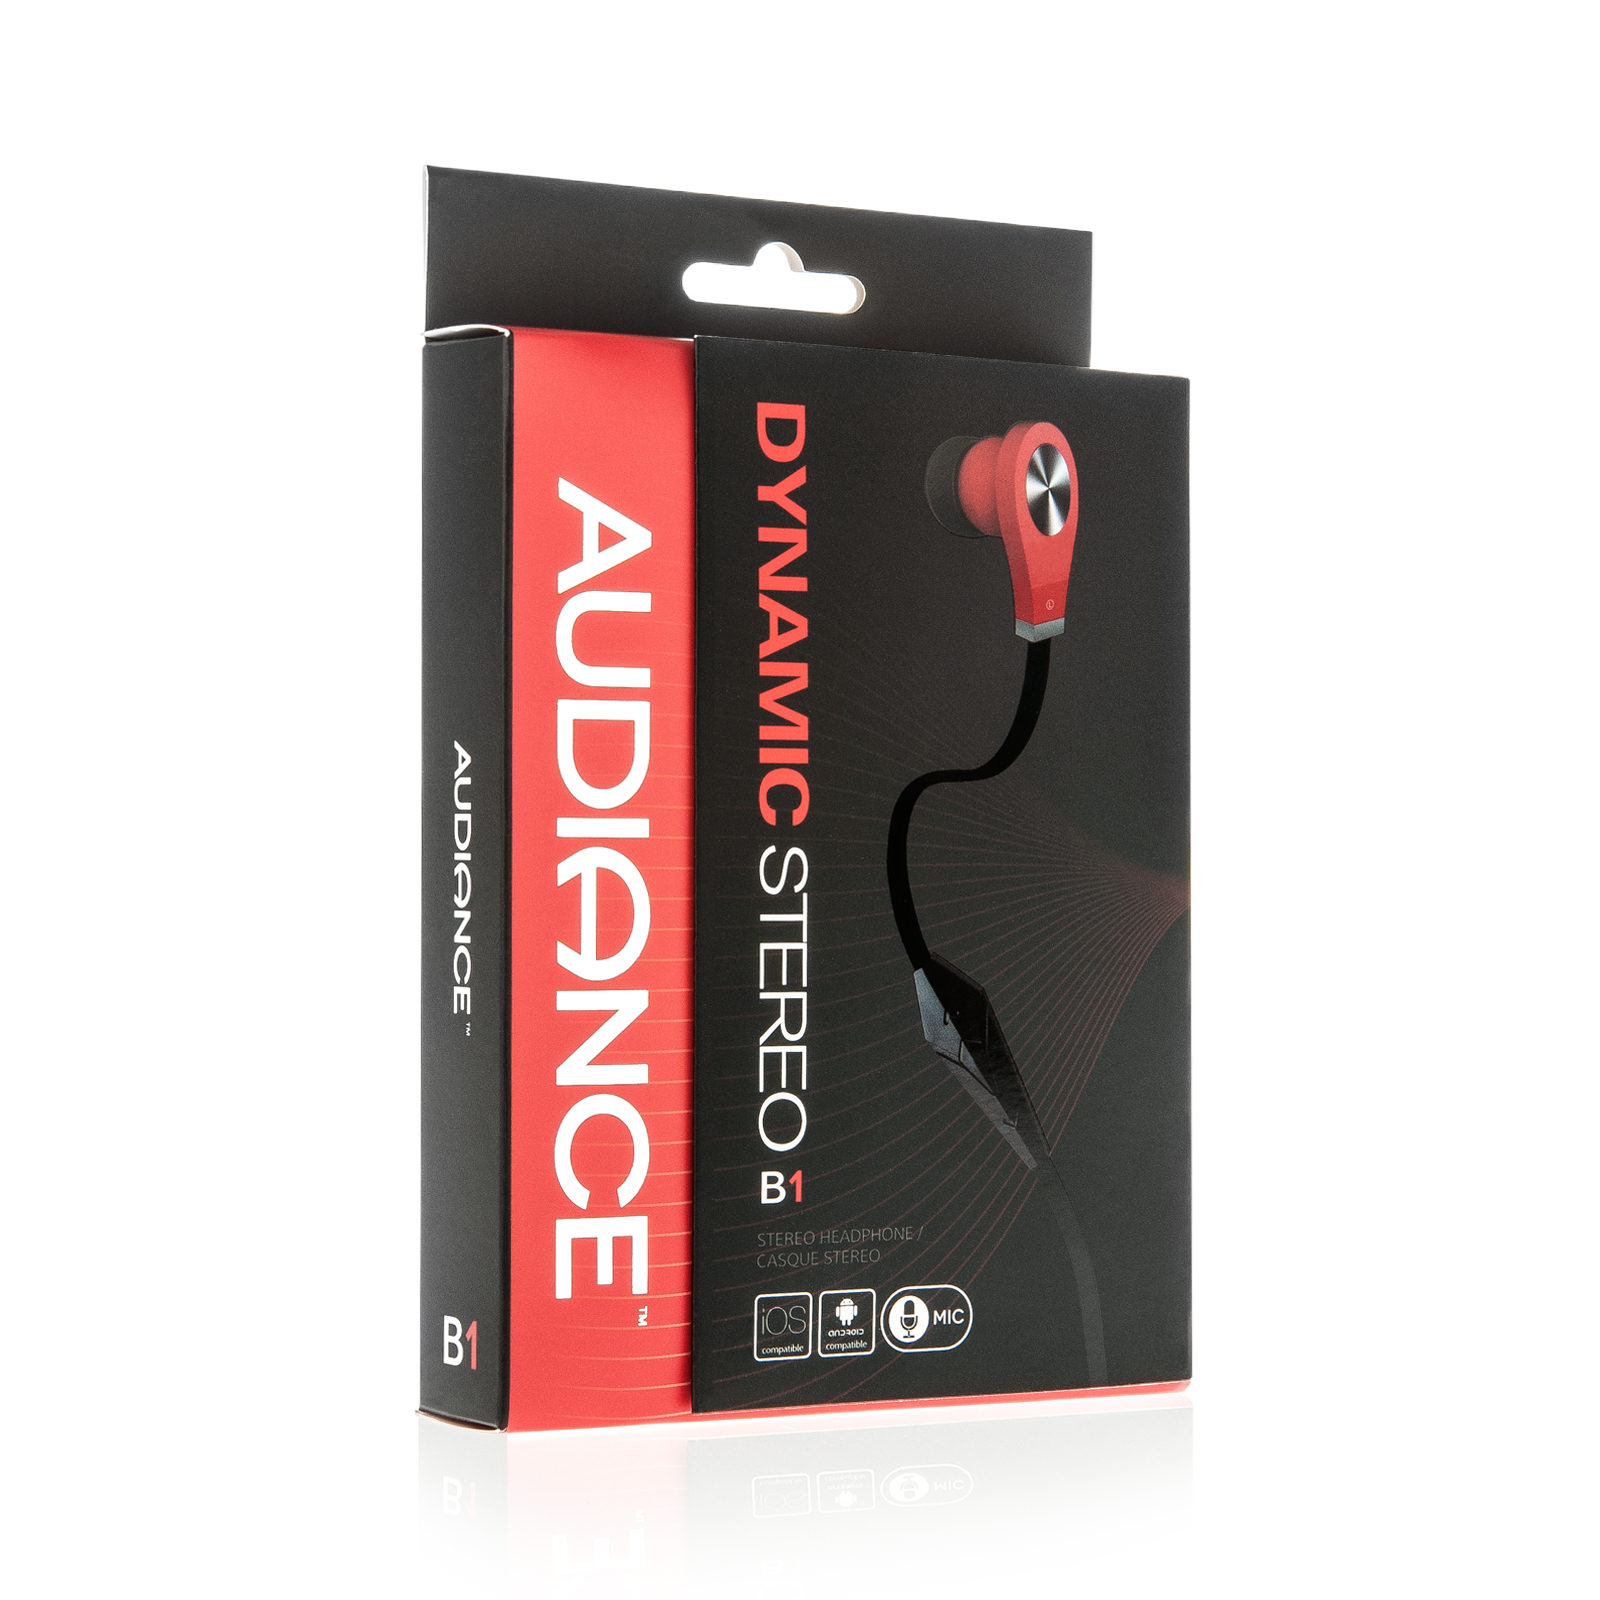 Audiance B1 Ear-Buds - Black Cable